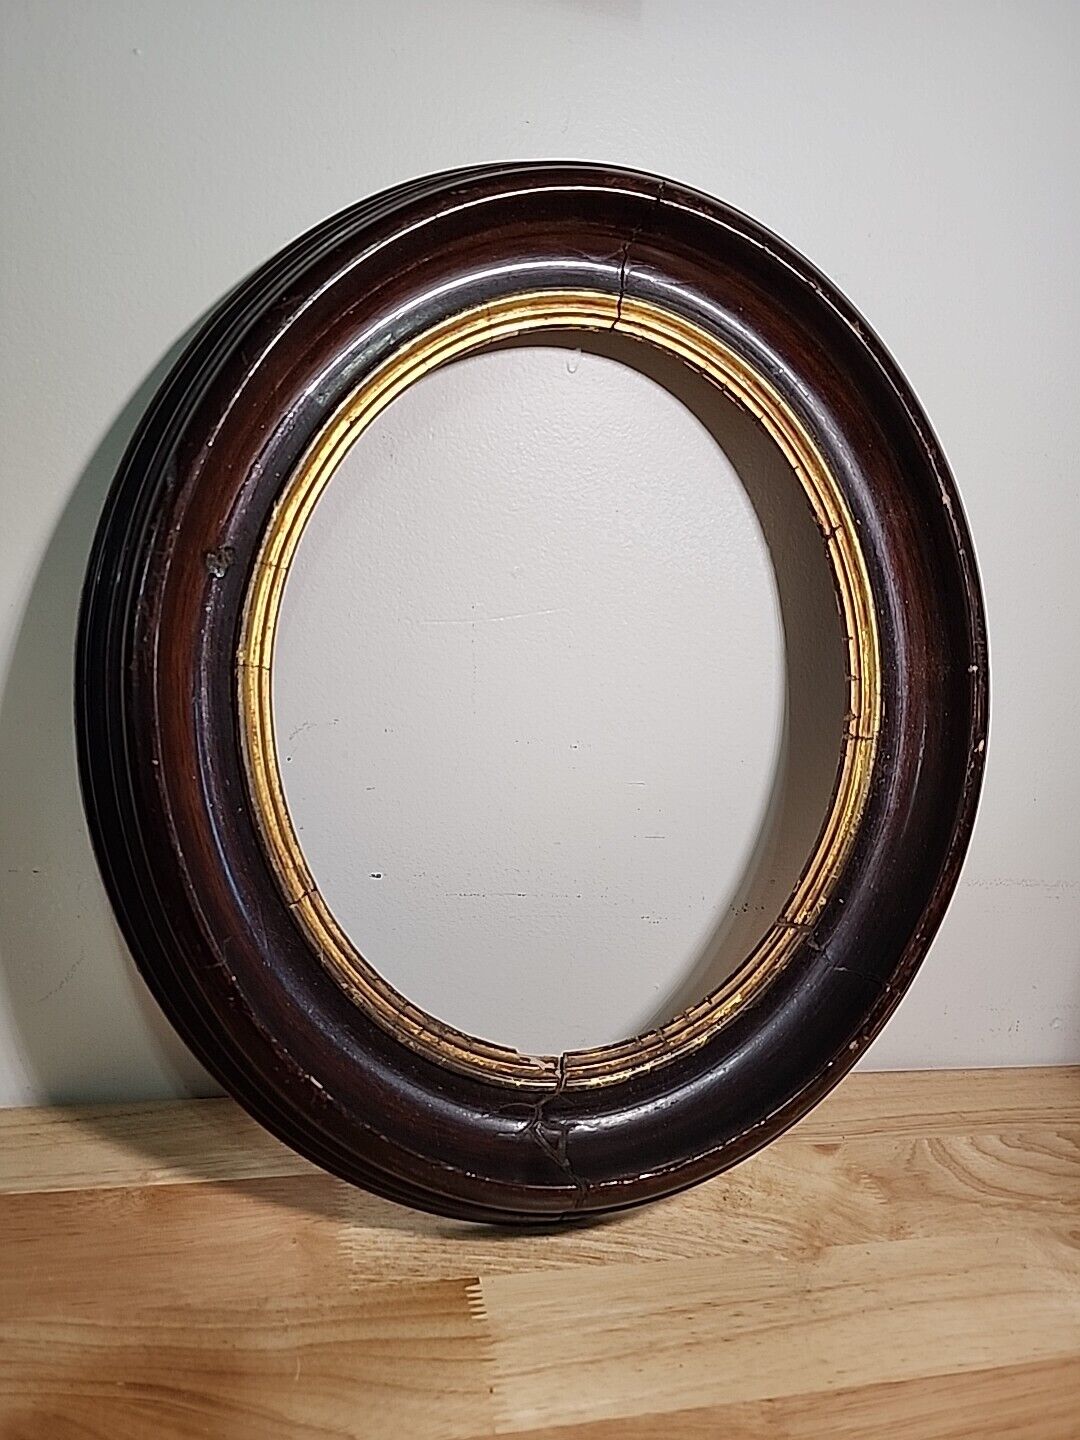 Distressed Antique Wooden oval frame 15x17 Holds 10x12 Photo Repaired Damaged 